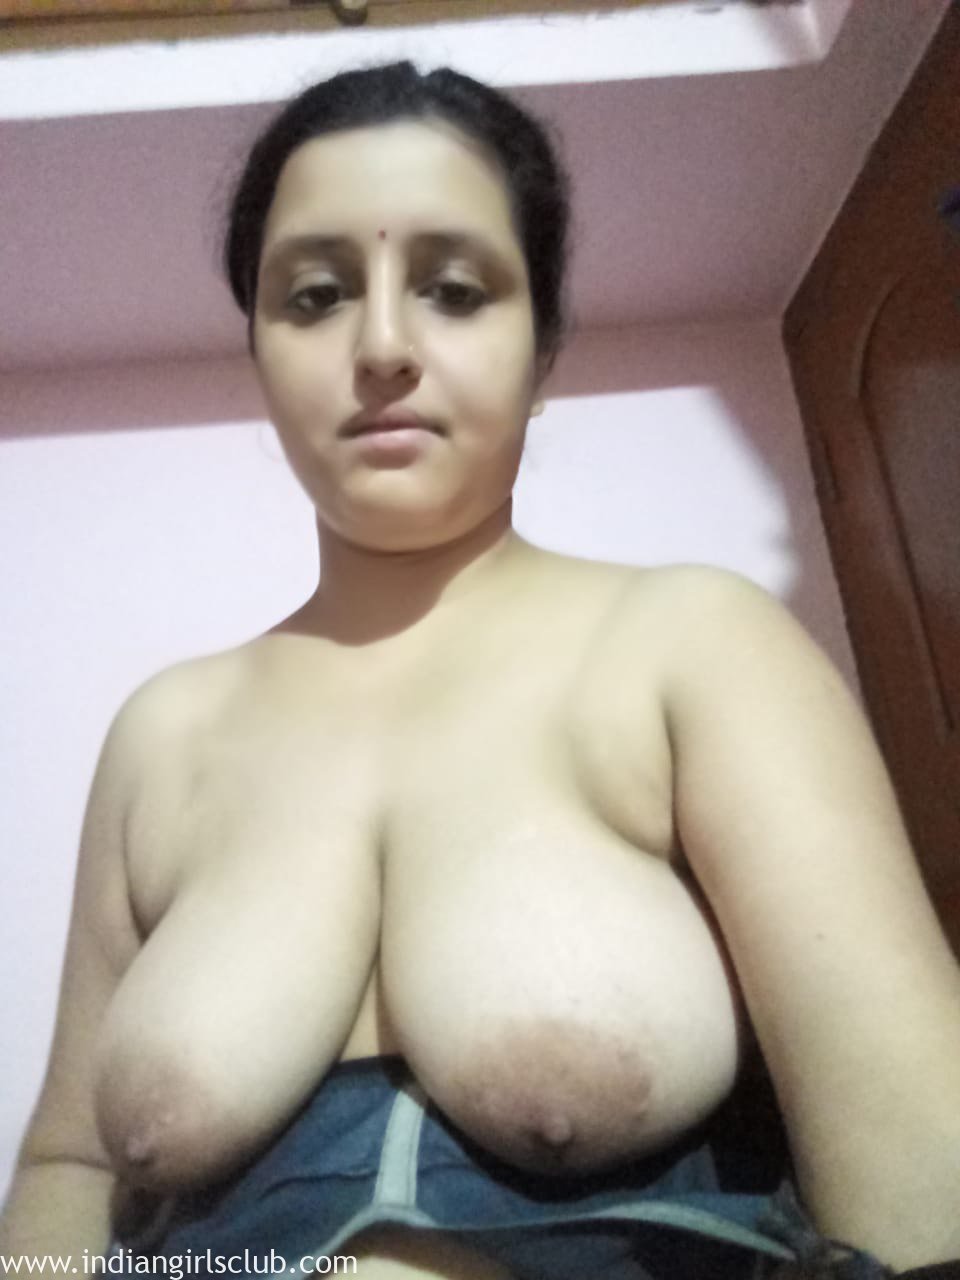 big-tits-bengali-indian-housewife-ready-for-hot-sex-19 - Indian Girls Club  image